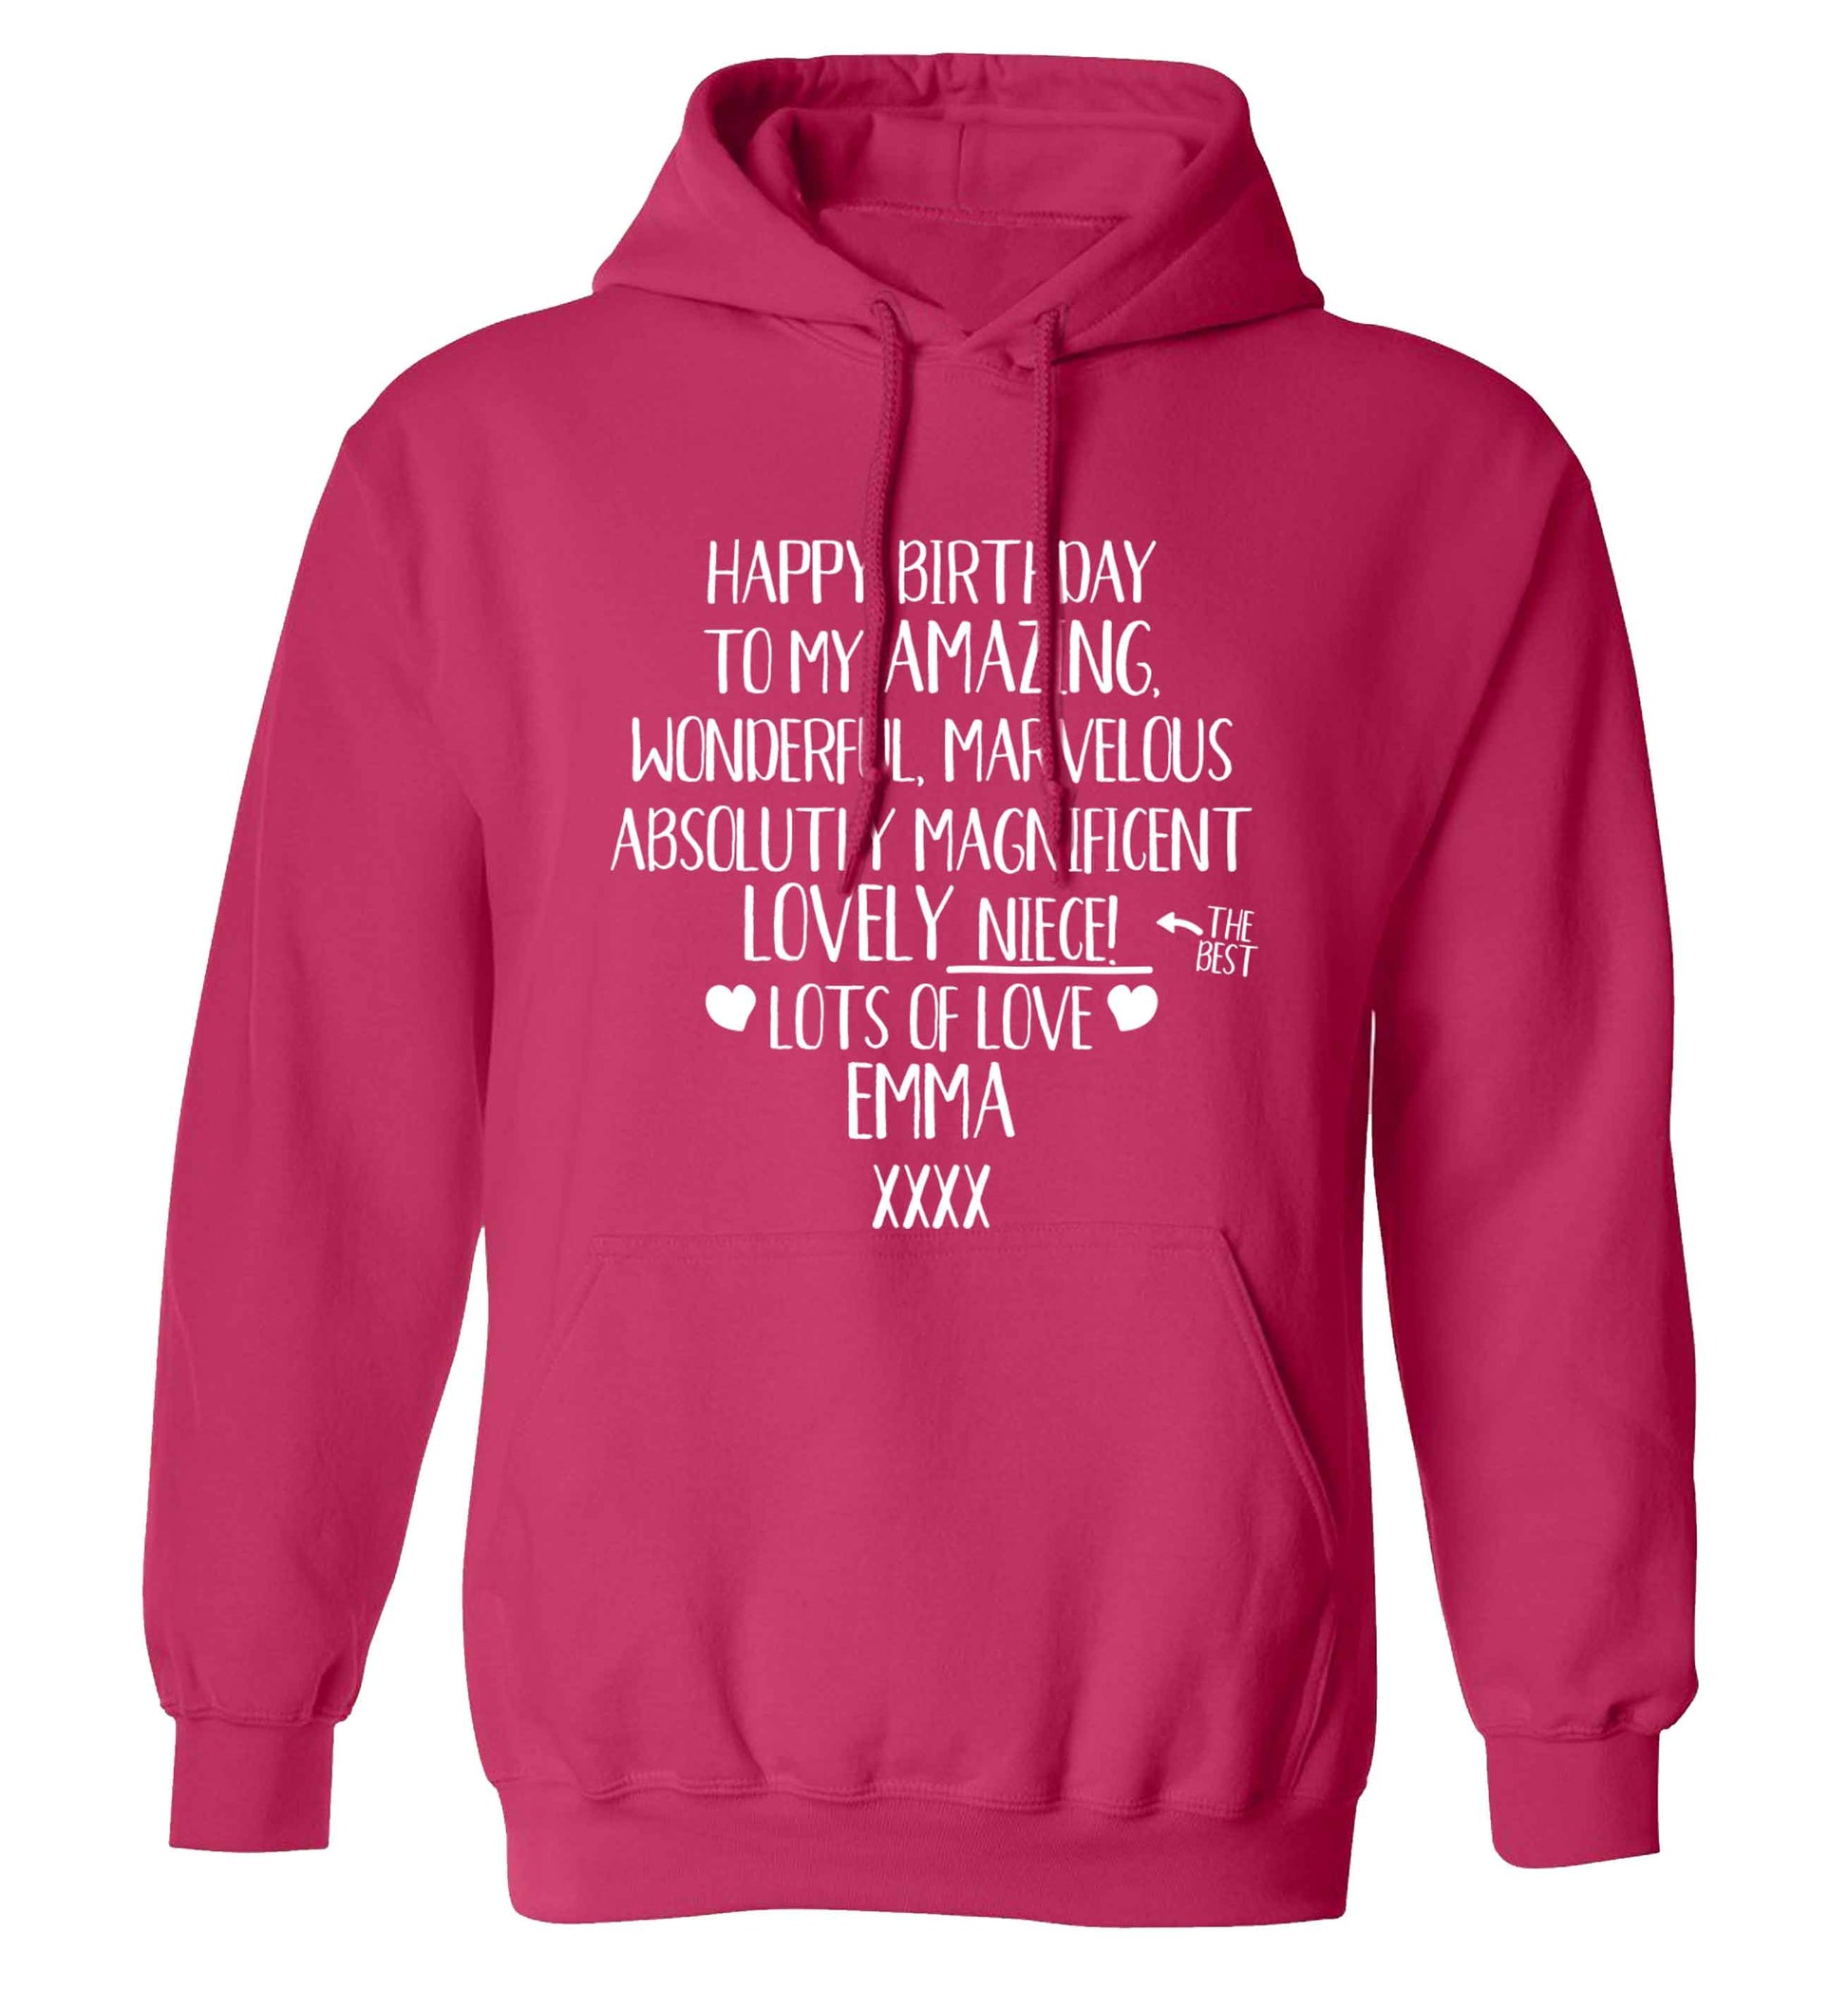 Personalised happy birthday to my amazing, wonderful, lovely niece adults unisex pink hoodie 2XL